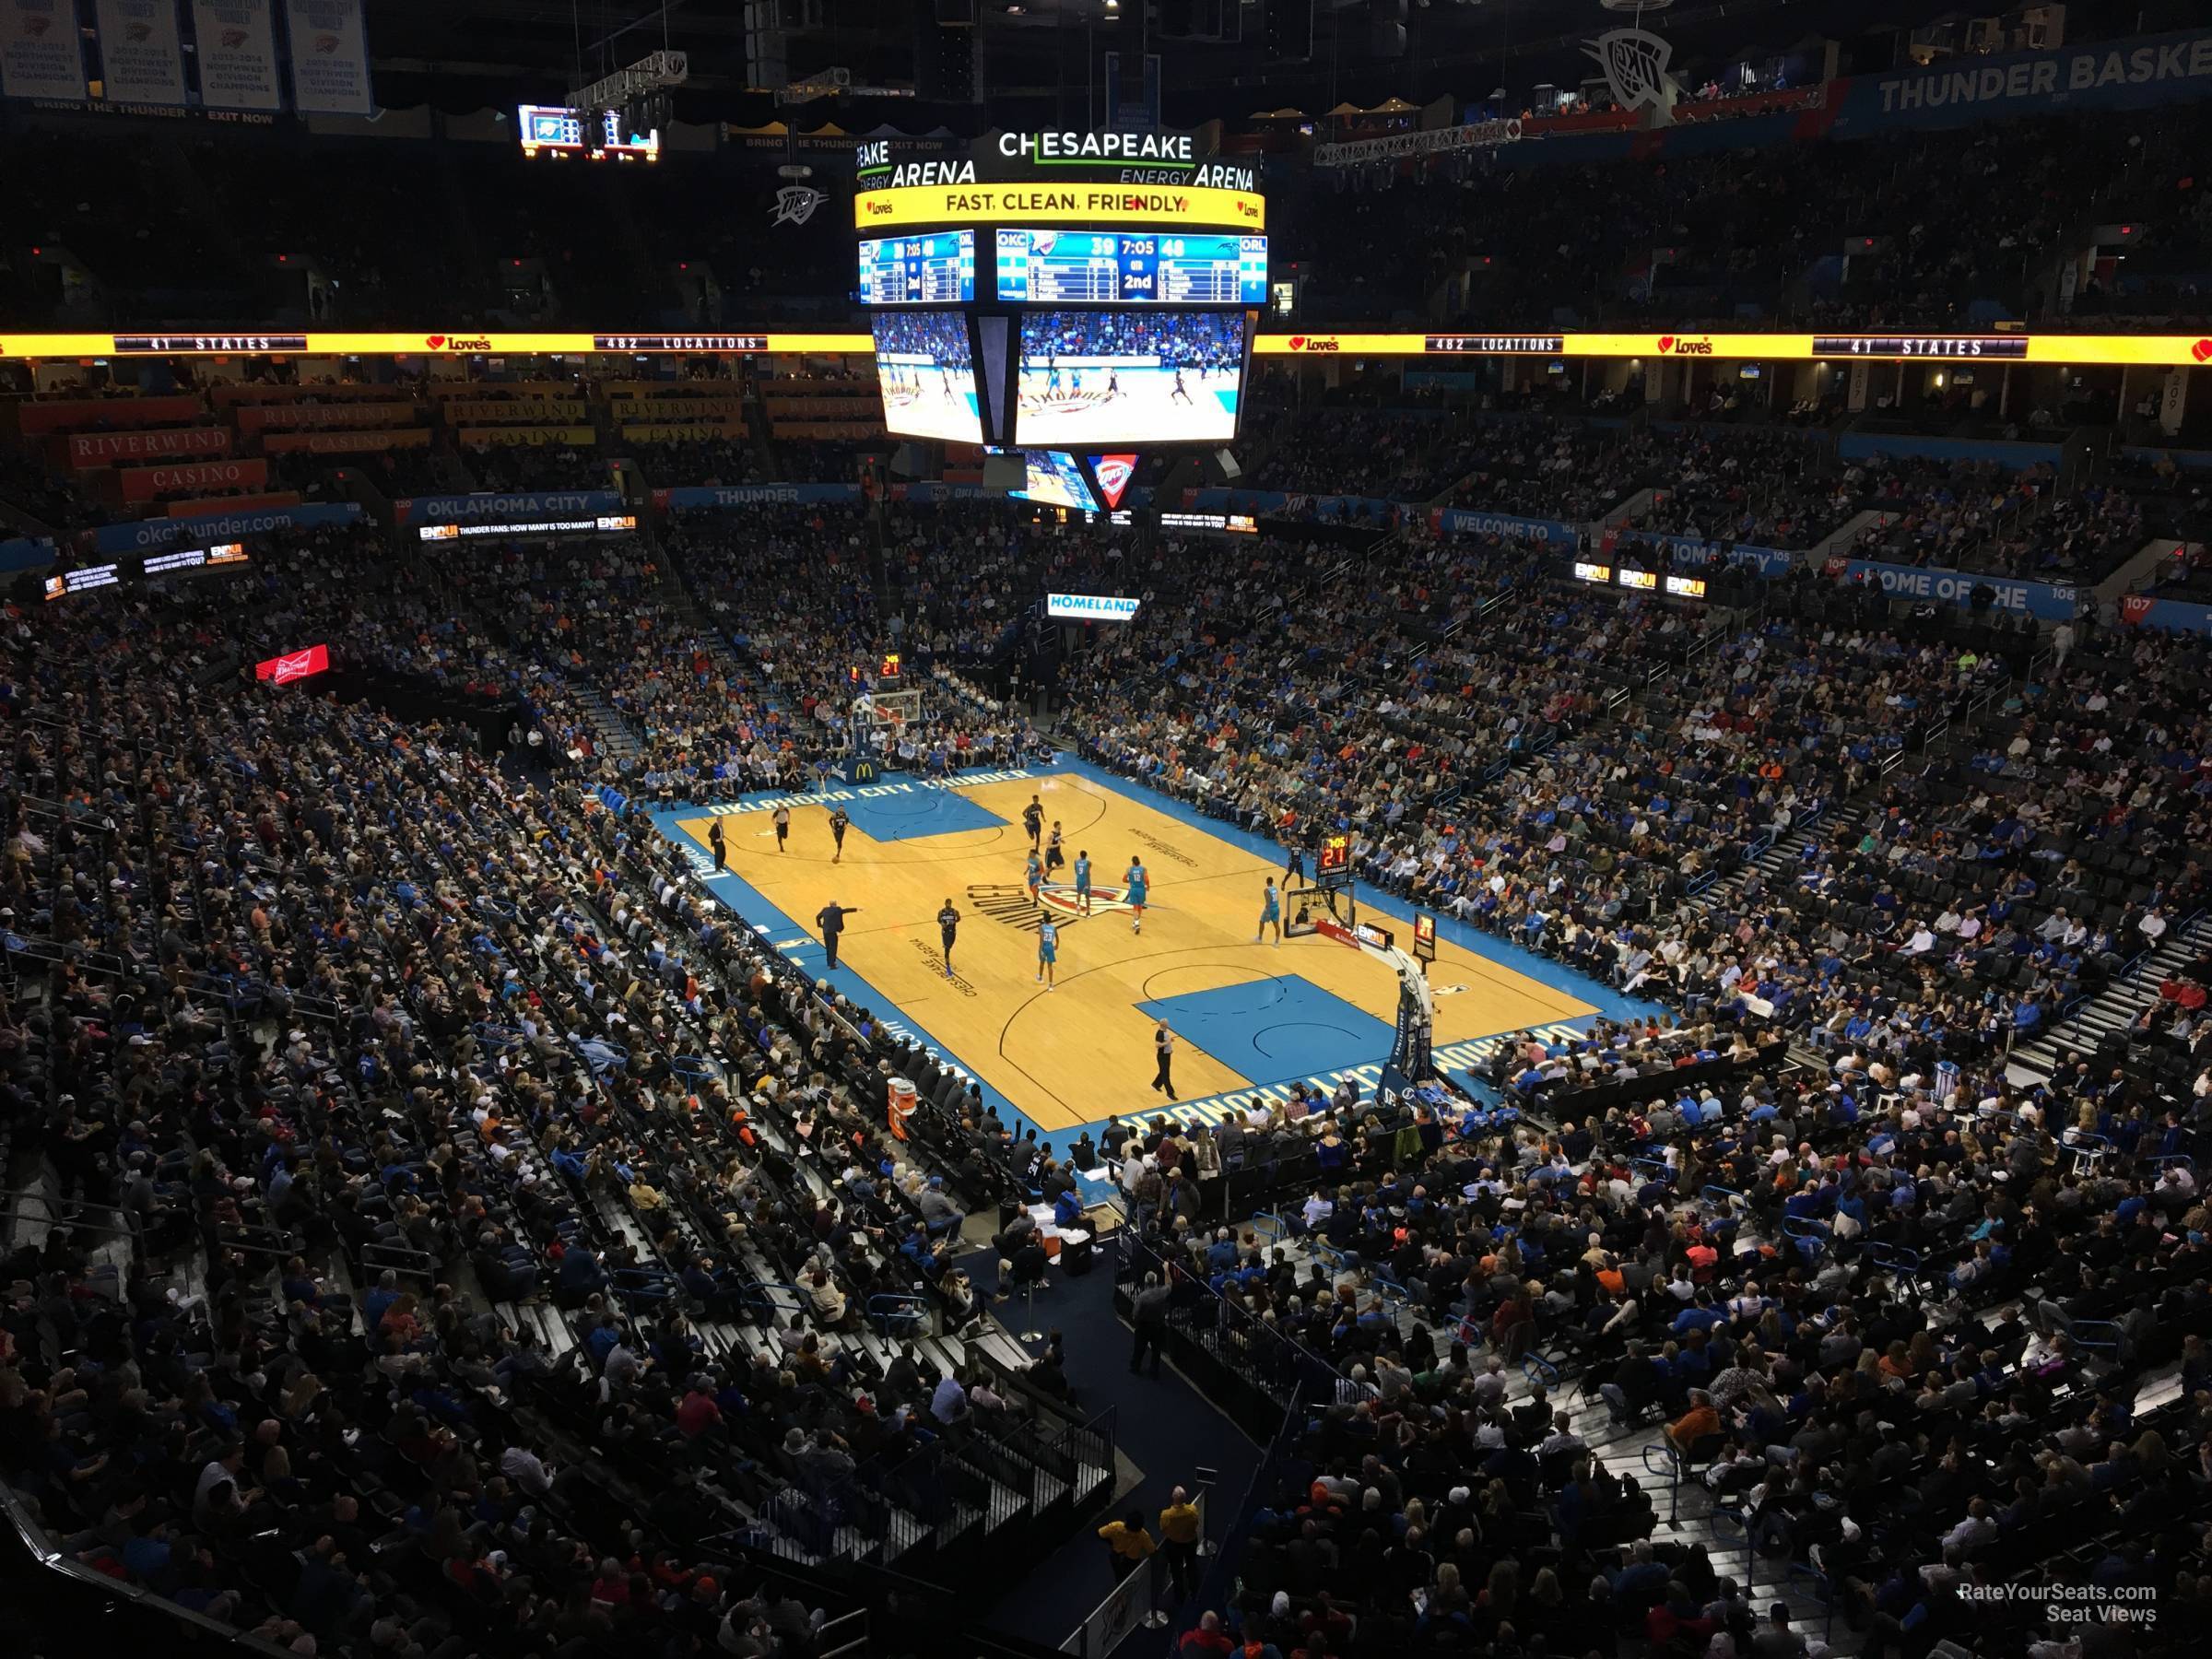 section 319, row a seat view  for basketball - paycom center